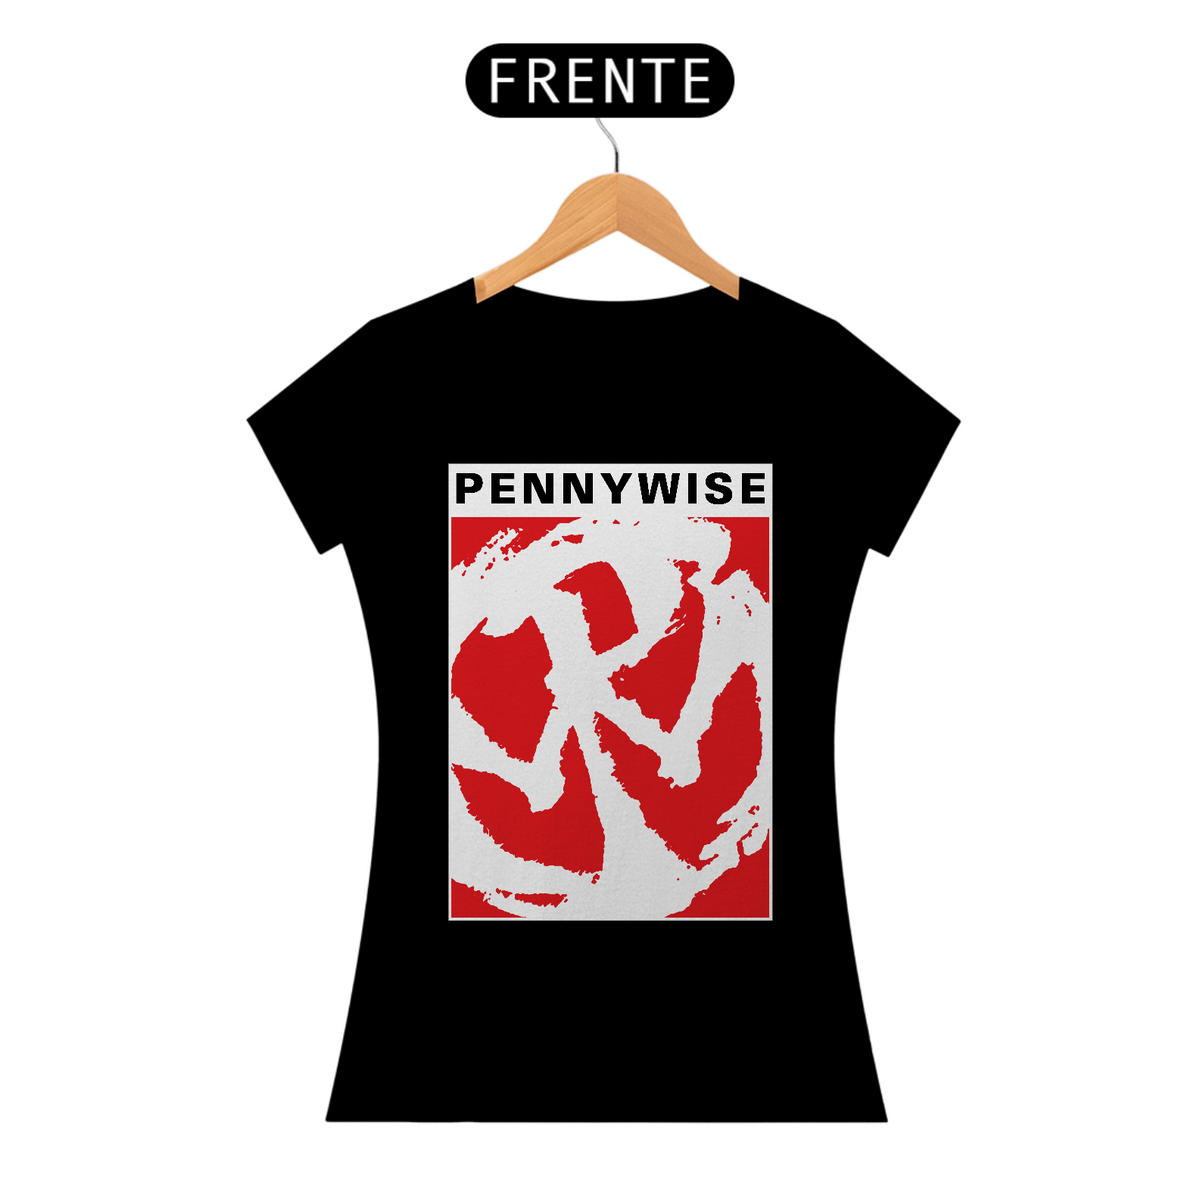 Nome do produto: Pennywise - Baby Look